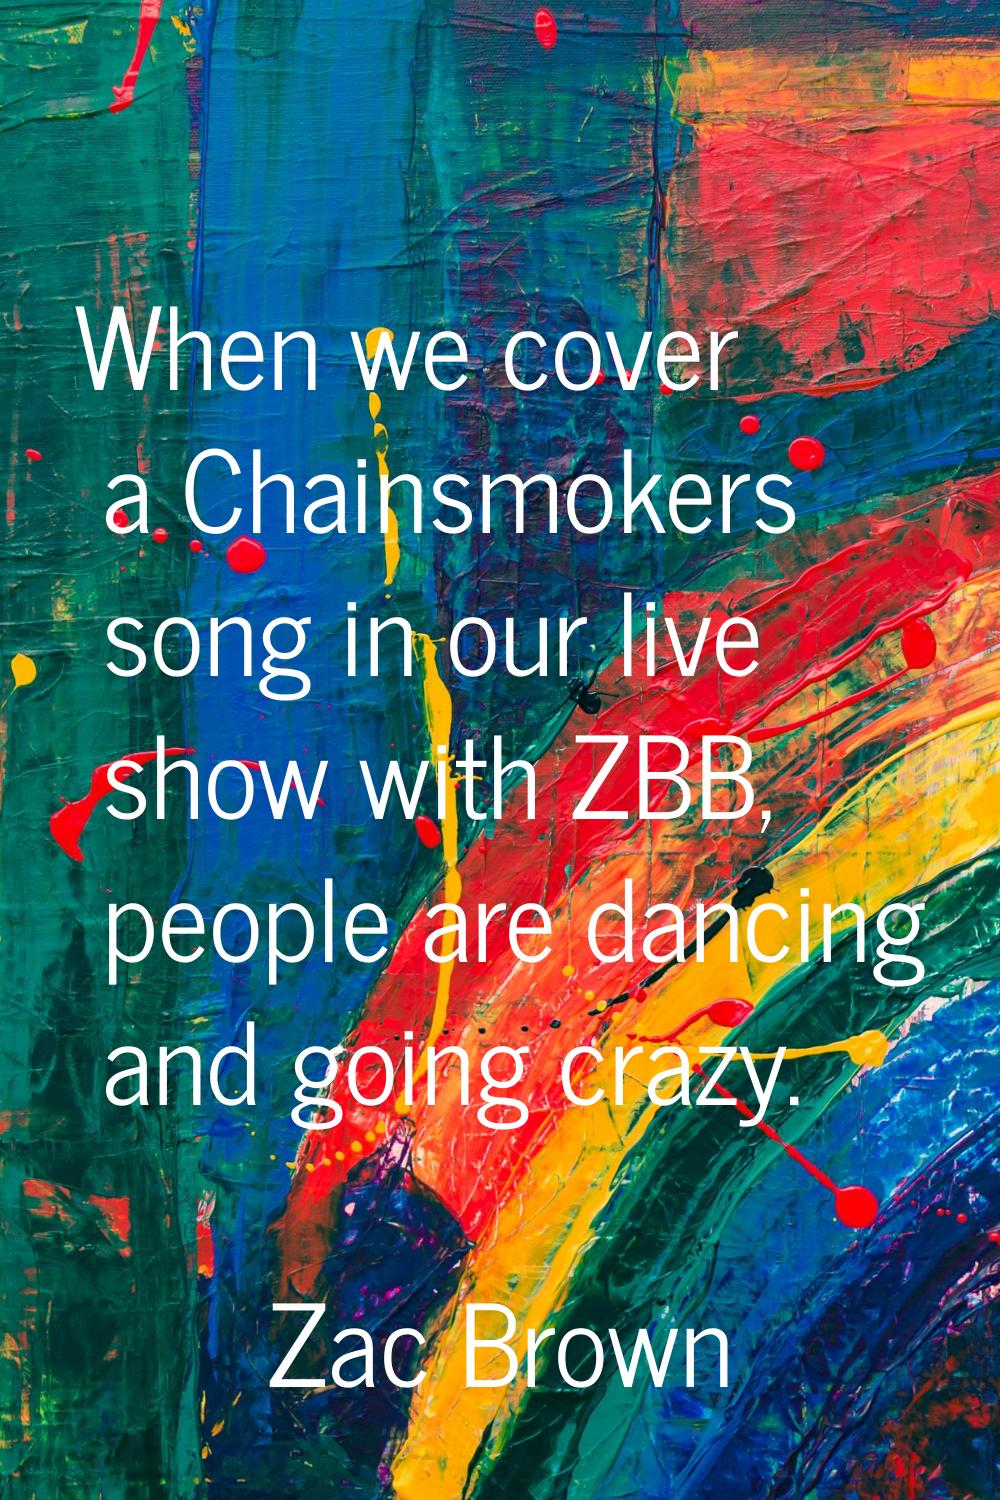 When we cover a Chainsmokers song in our live show with ZBB, people are dancing and going crazy.